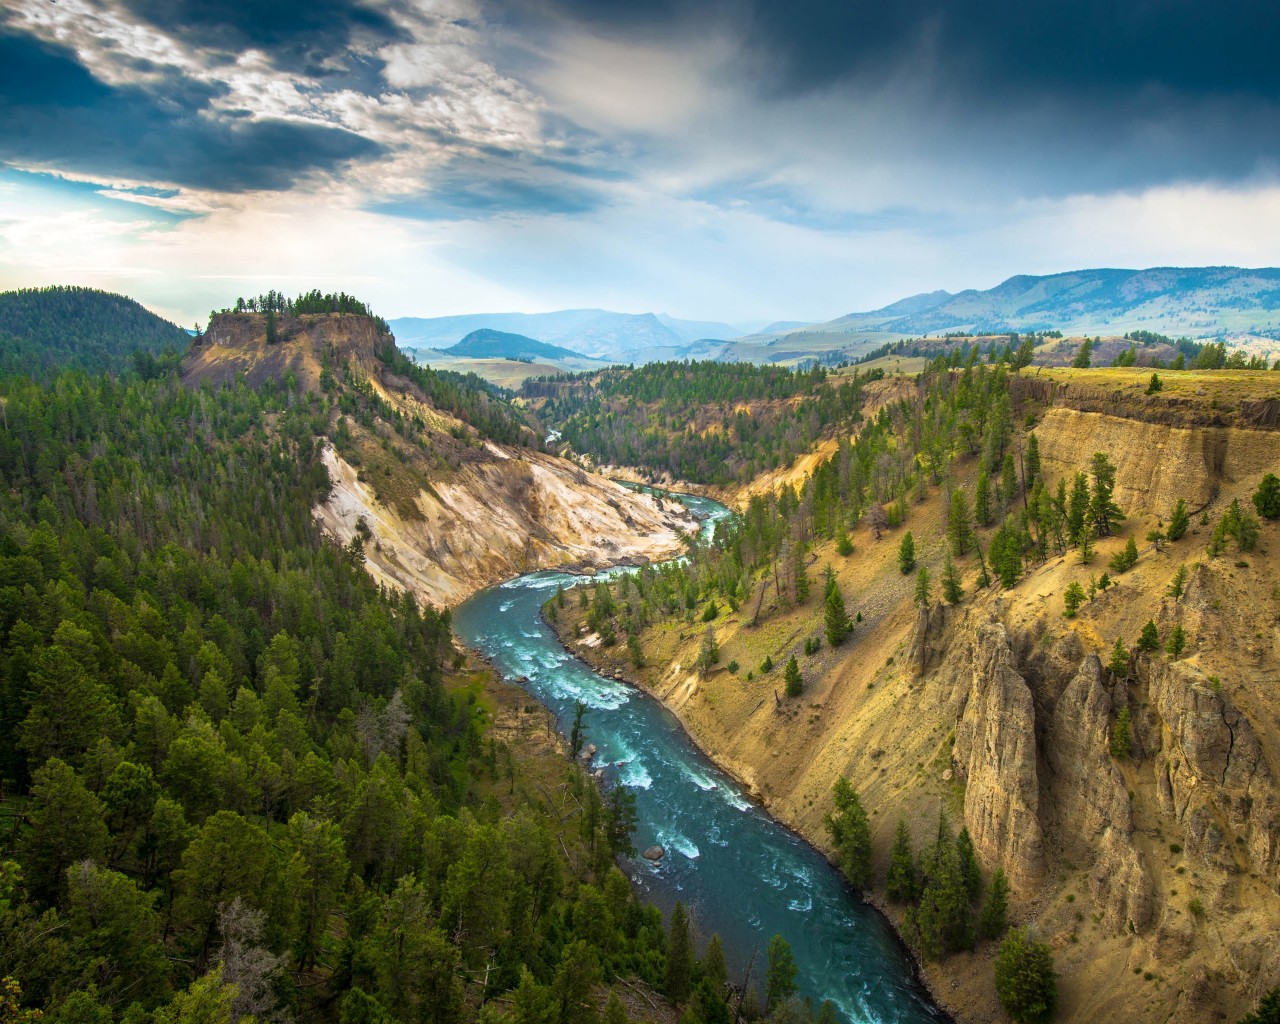 The River, Grand Canyon of Yellowstone National Park, USA Wallpaper for Desktop 1280x1024